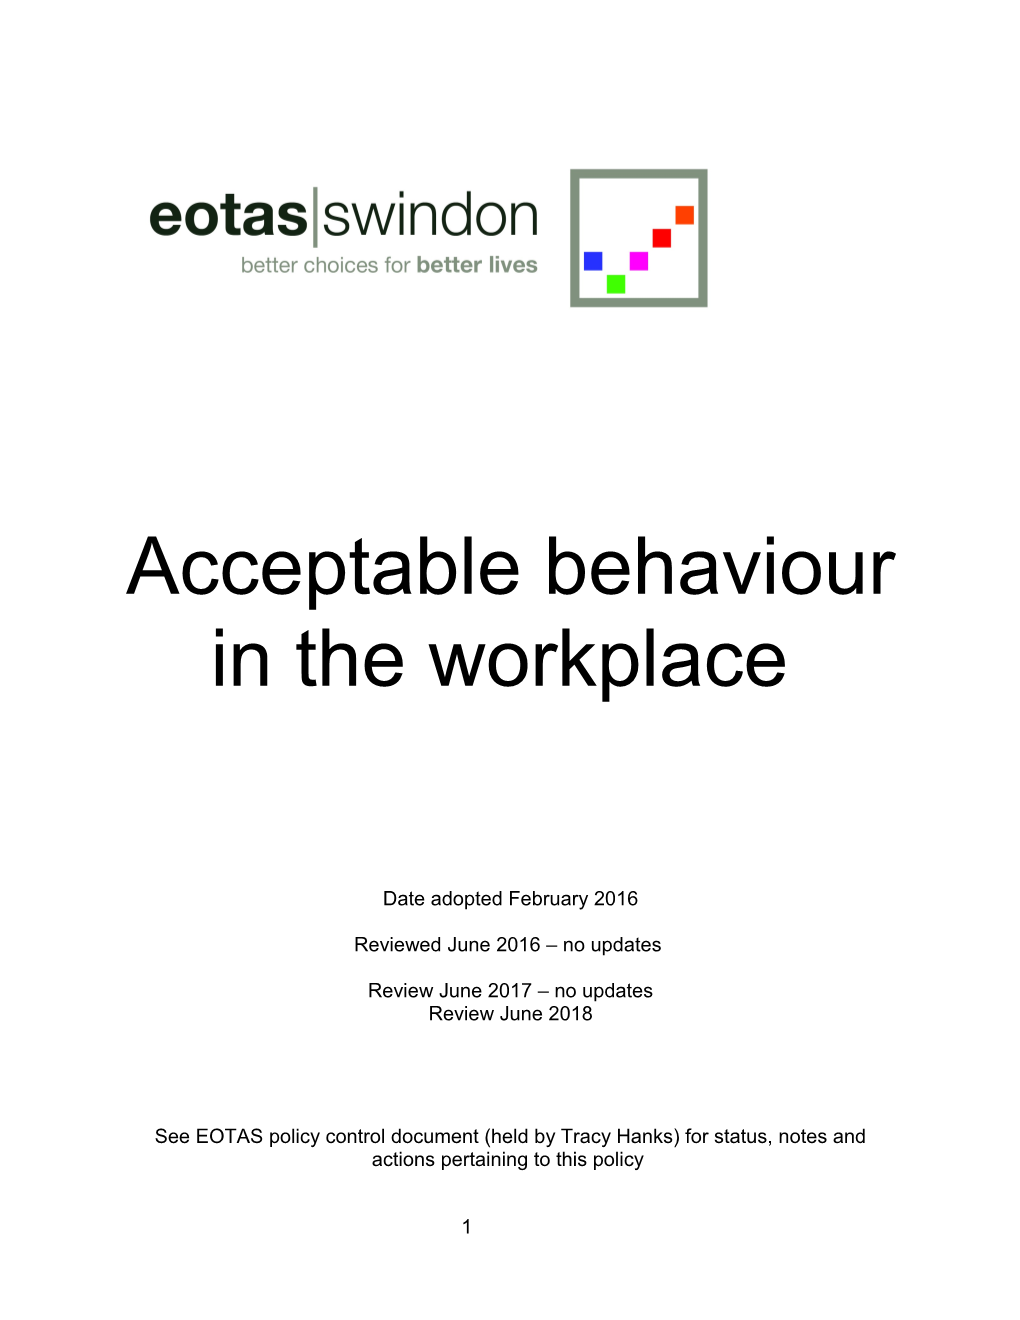 Acceptable Behaviour in the Workplace